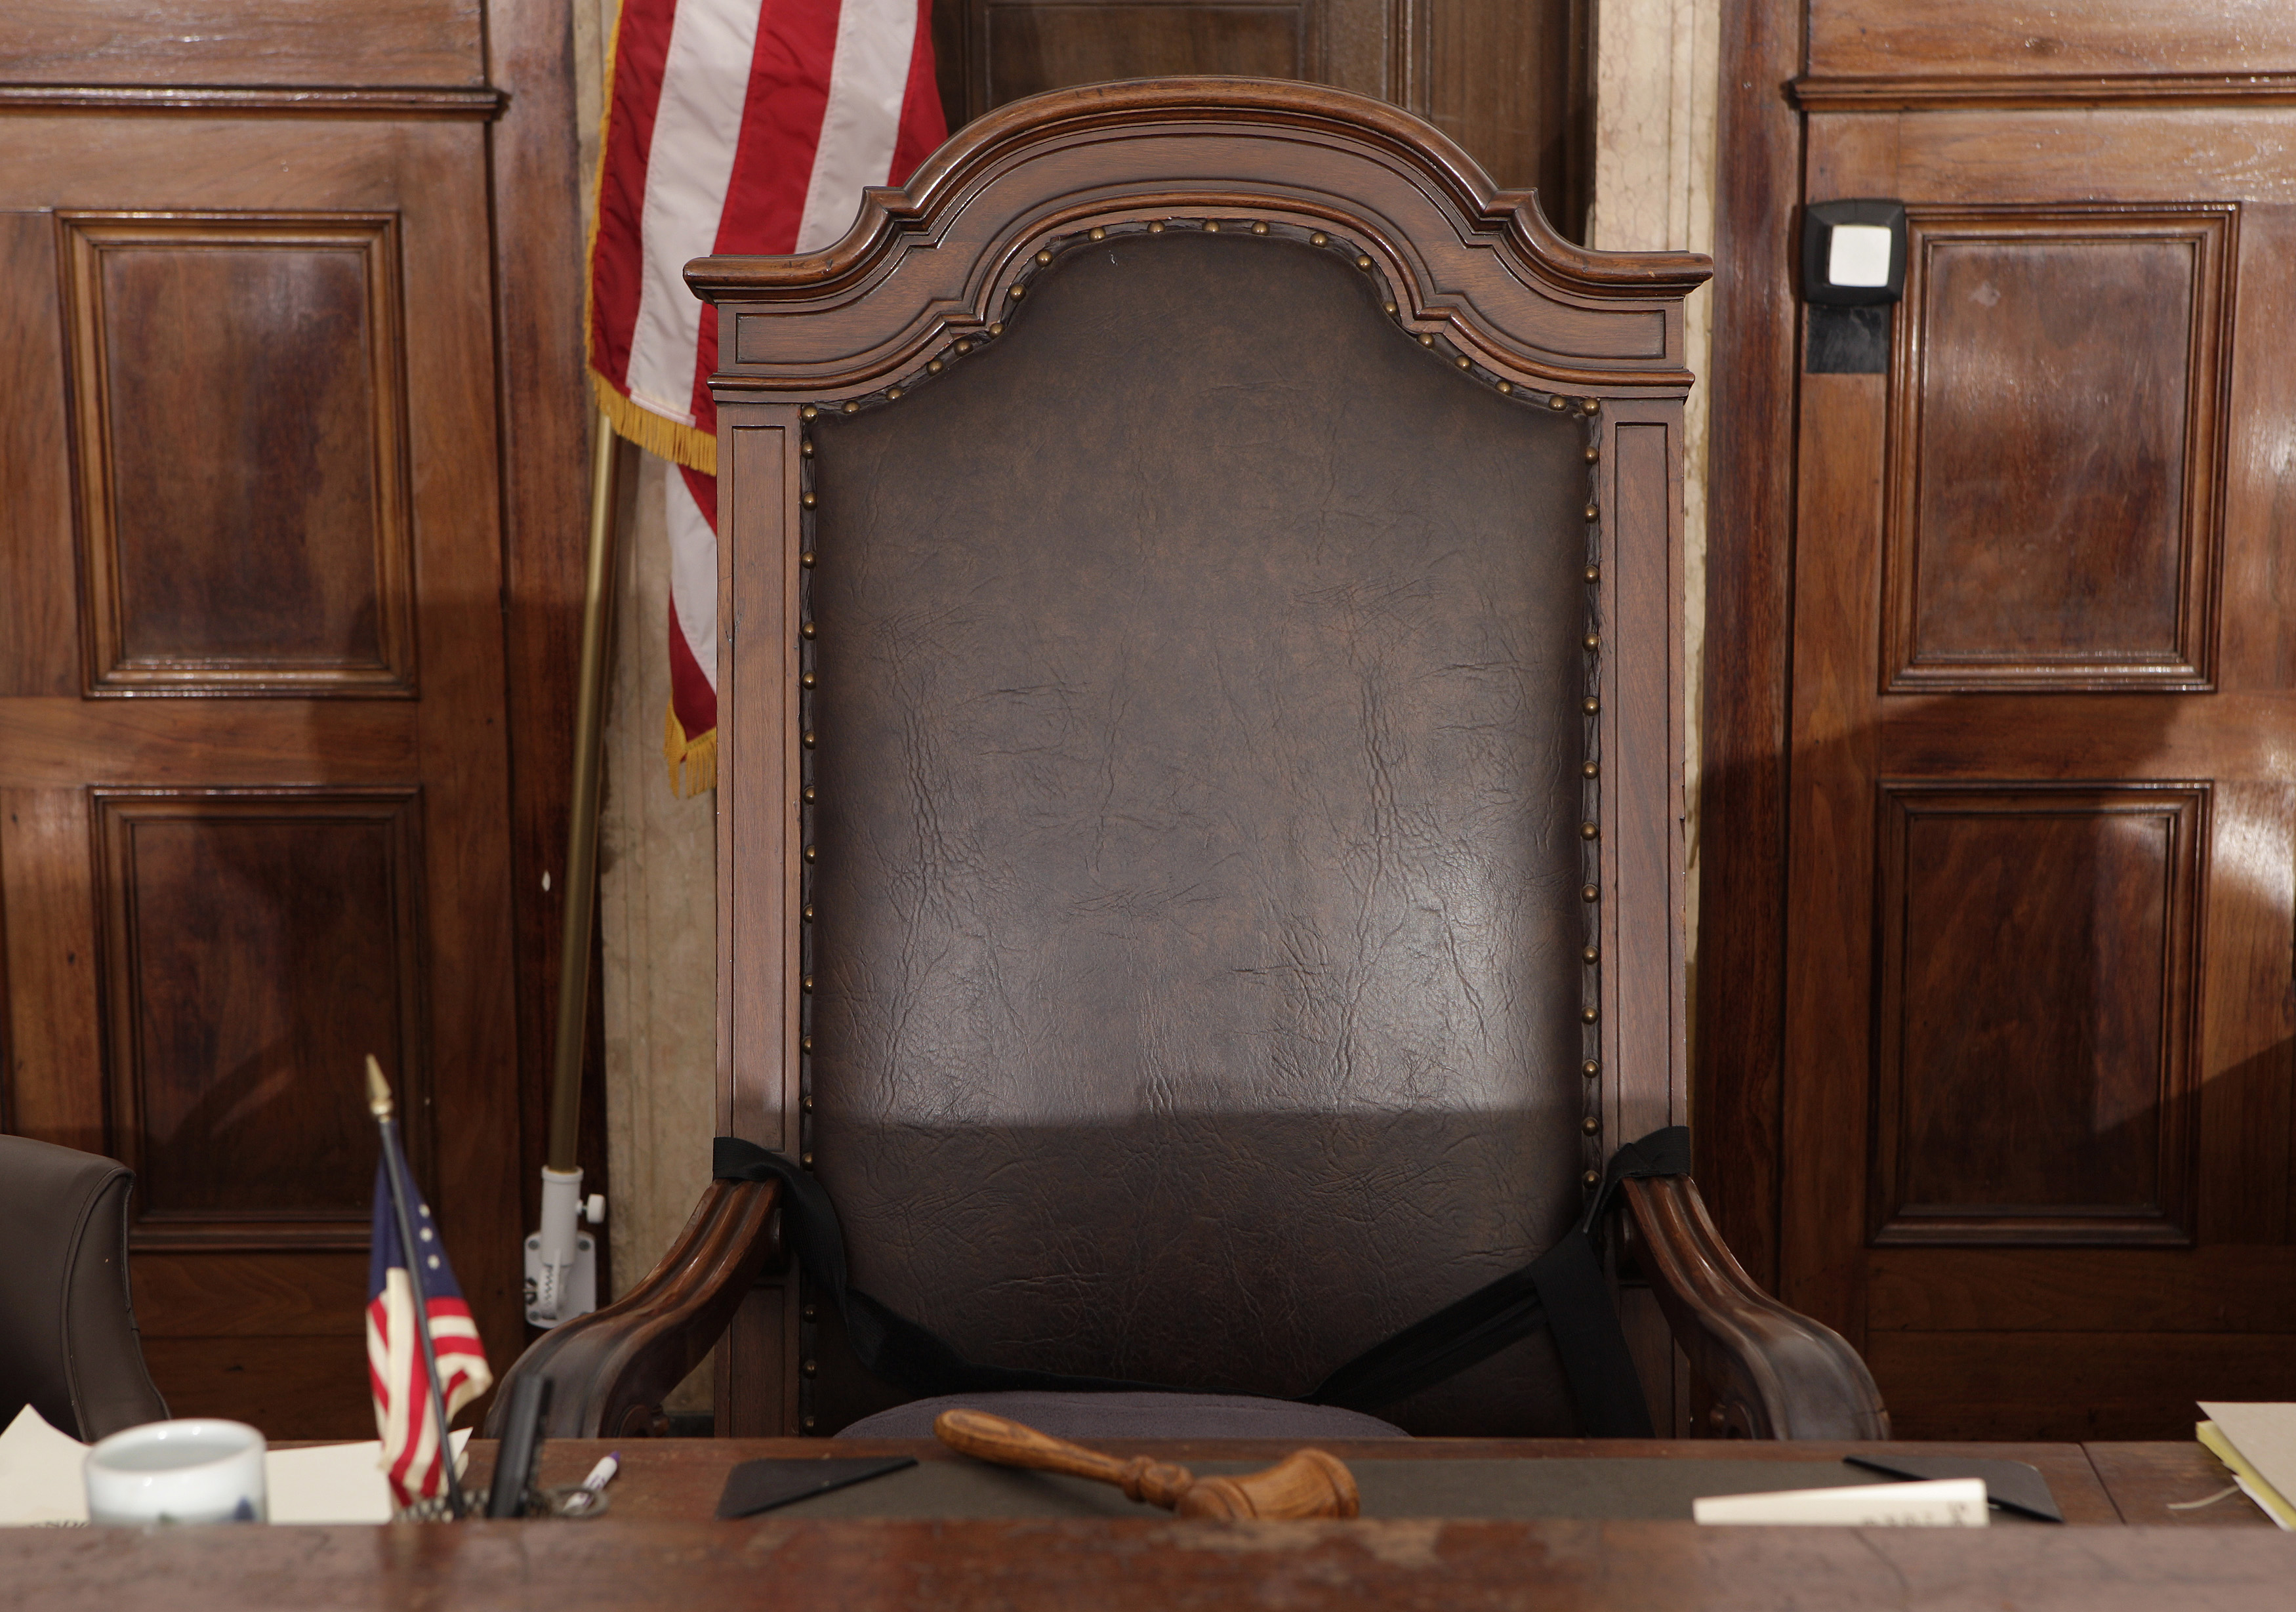 A view of the judge's chair in court room 422 of the New York Supreme Court at 60 Centre Street February 3, 2012.  Picture taken February 3, 2012. REUTERS/Chip East (UNITED STATES- Tags: CRIME LAW) - GM1E82D13FE01